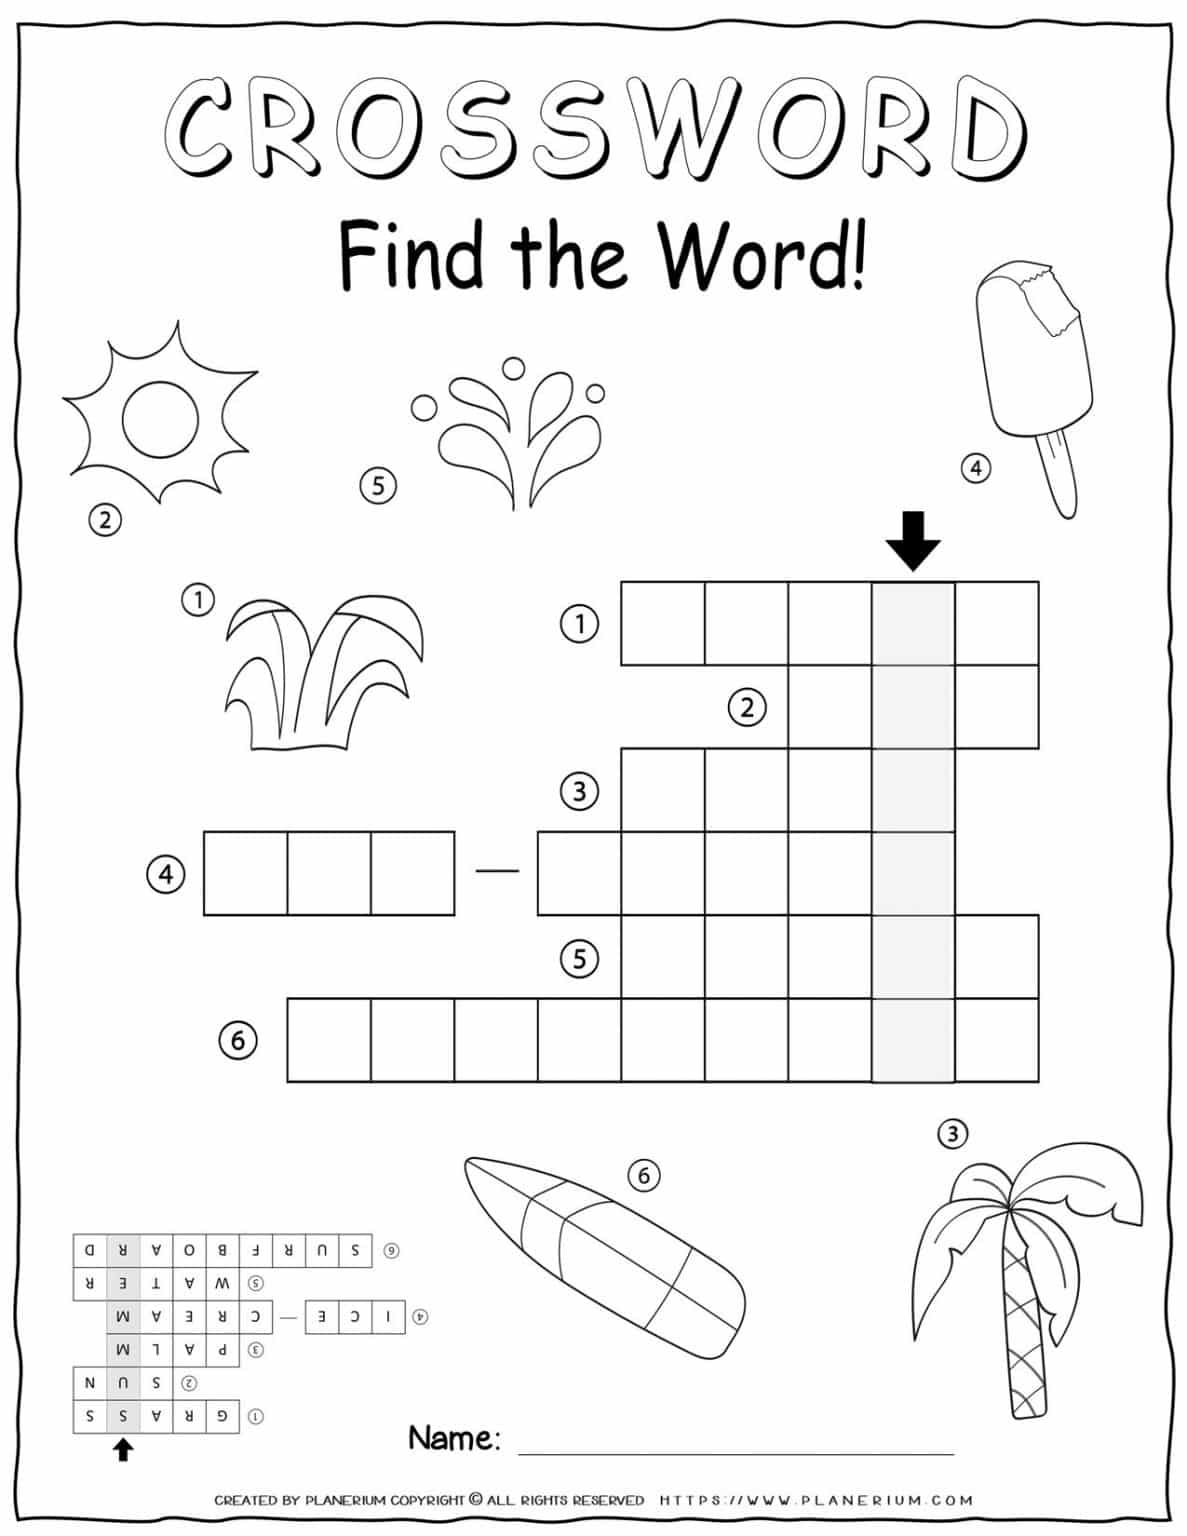 summer-crossword-puzzles-for-kids-tree-valley-academy-summer-crossword-gracie-reed